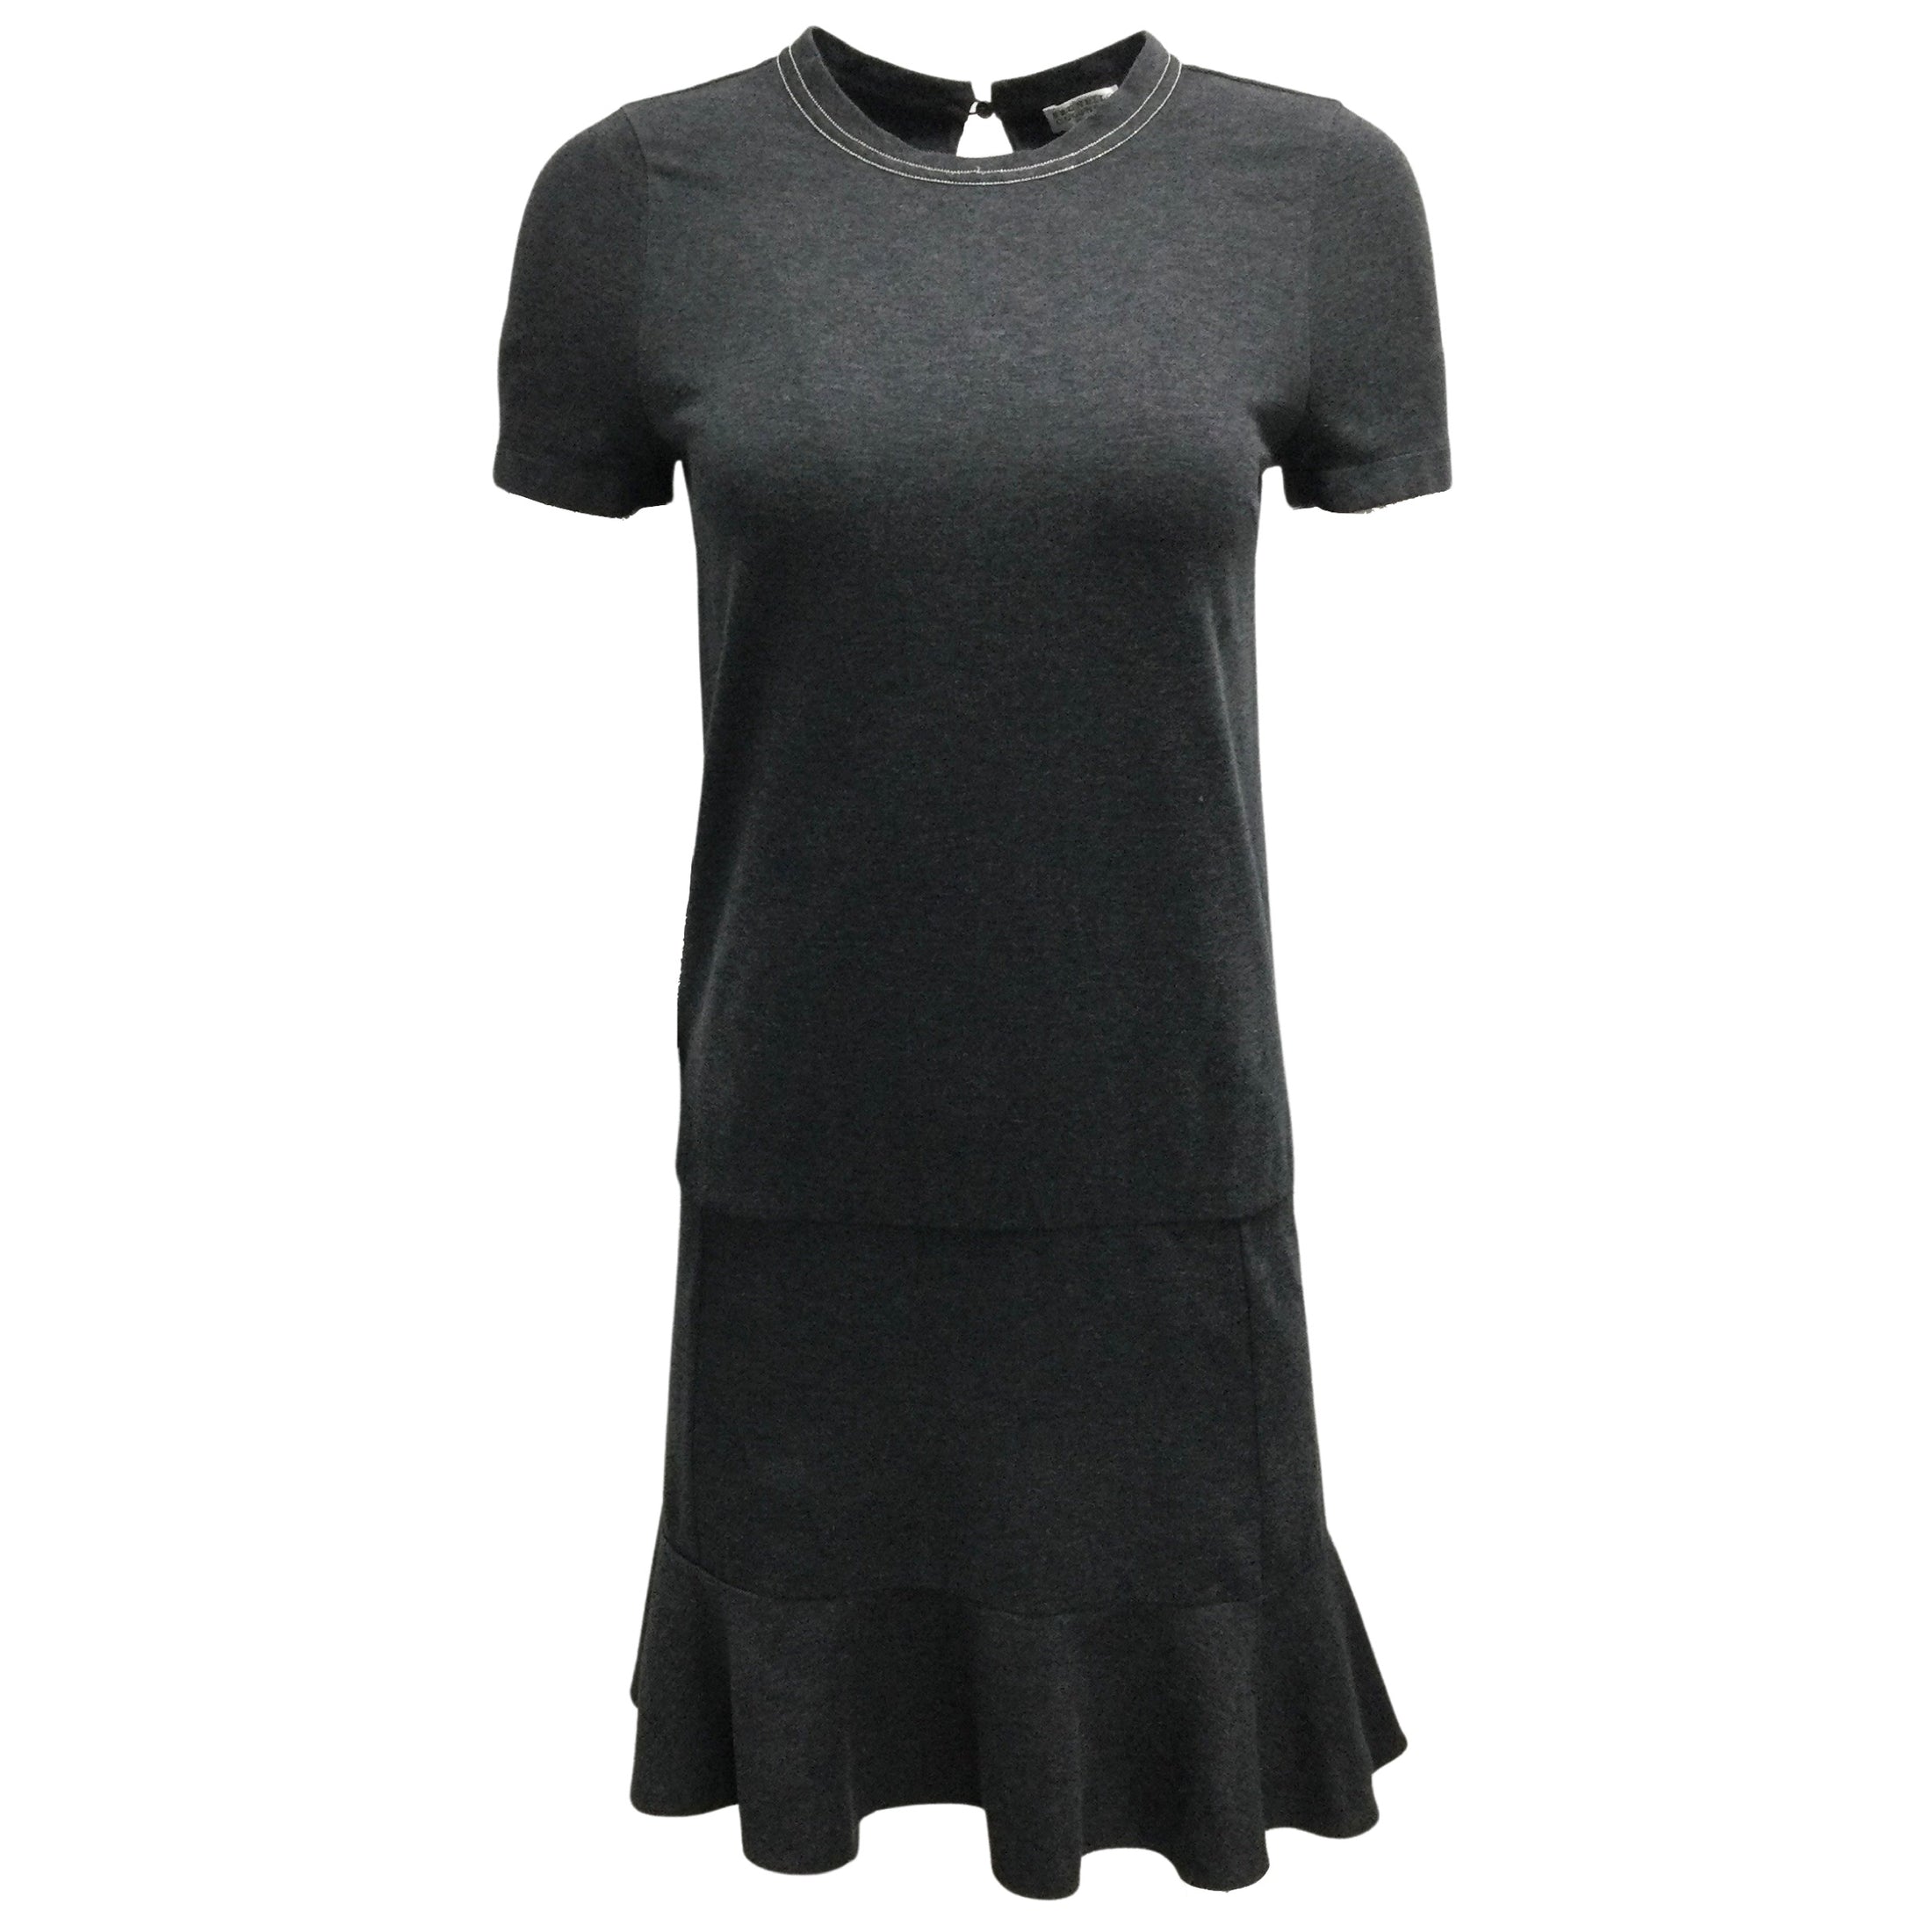 Brunello Cucinelli Charcoal Grey Sleeved Cotton Short Casual Dress